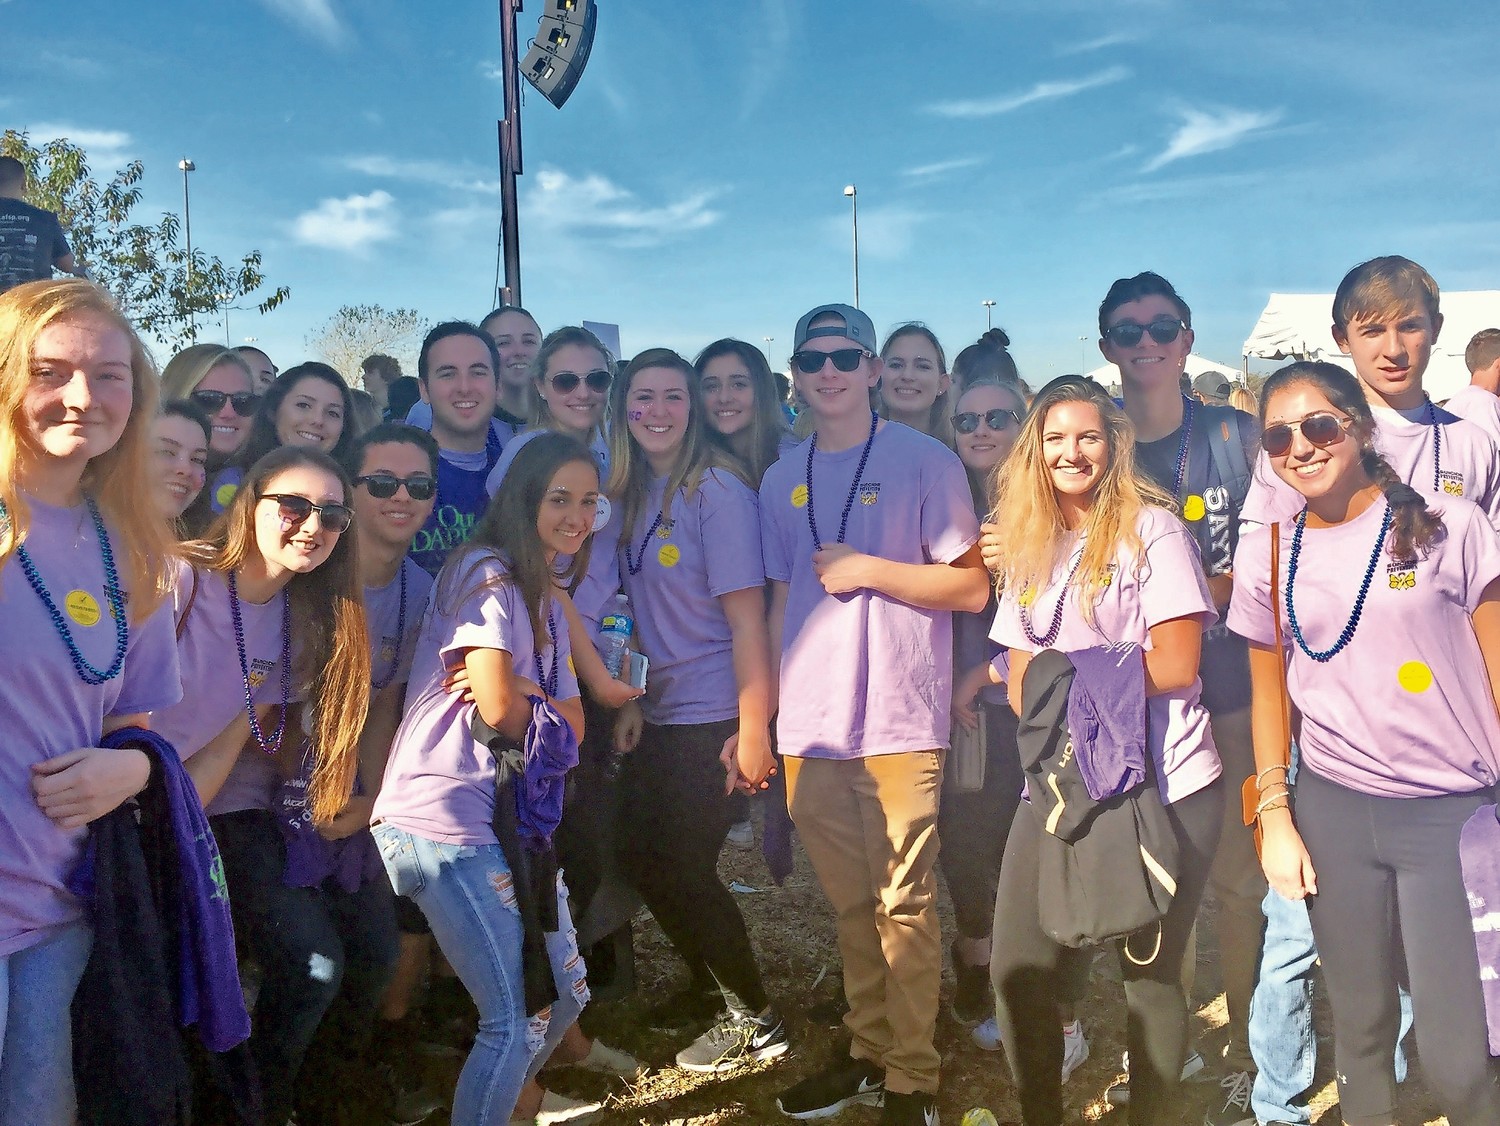 Team Emma was the second top fundraising team for the Out of Darkness Walk. The Sayville High School students raised over $16,000 in just one week.